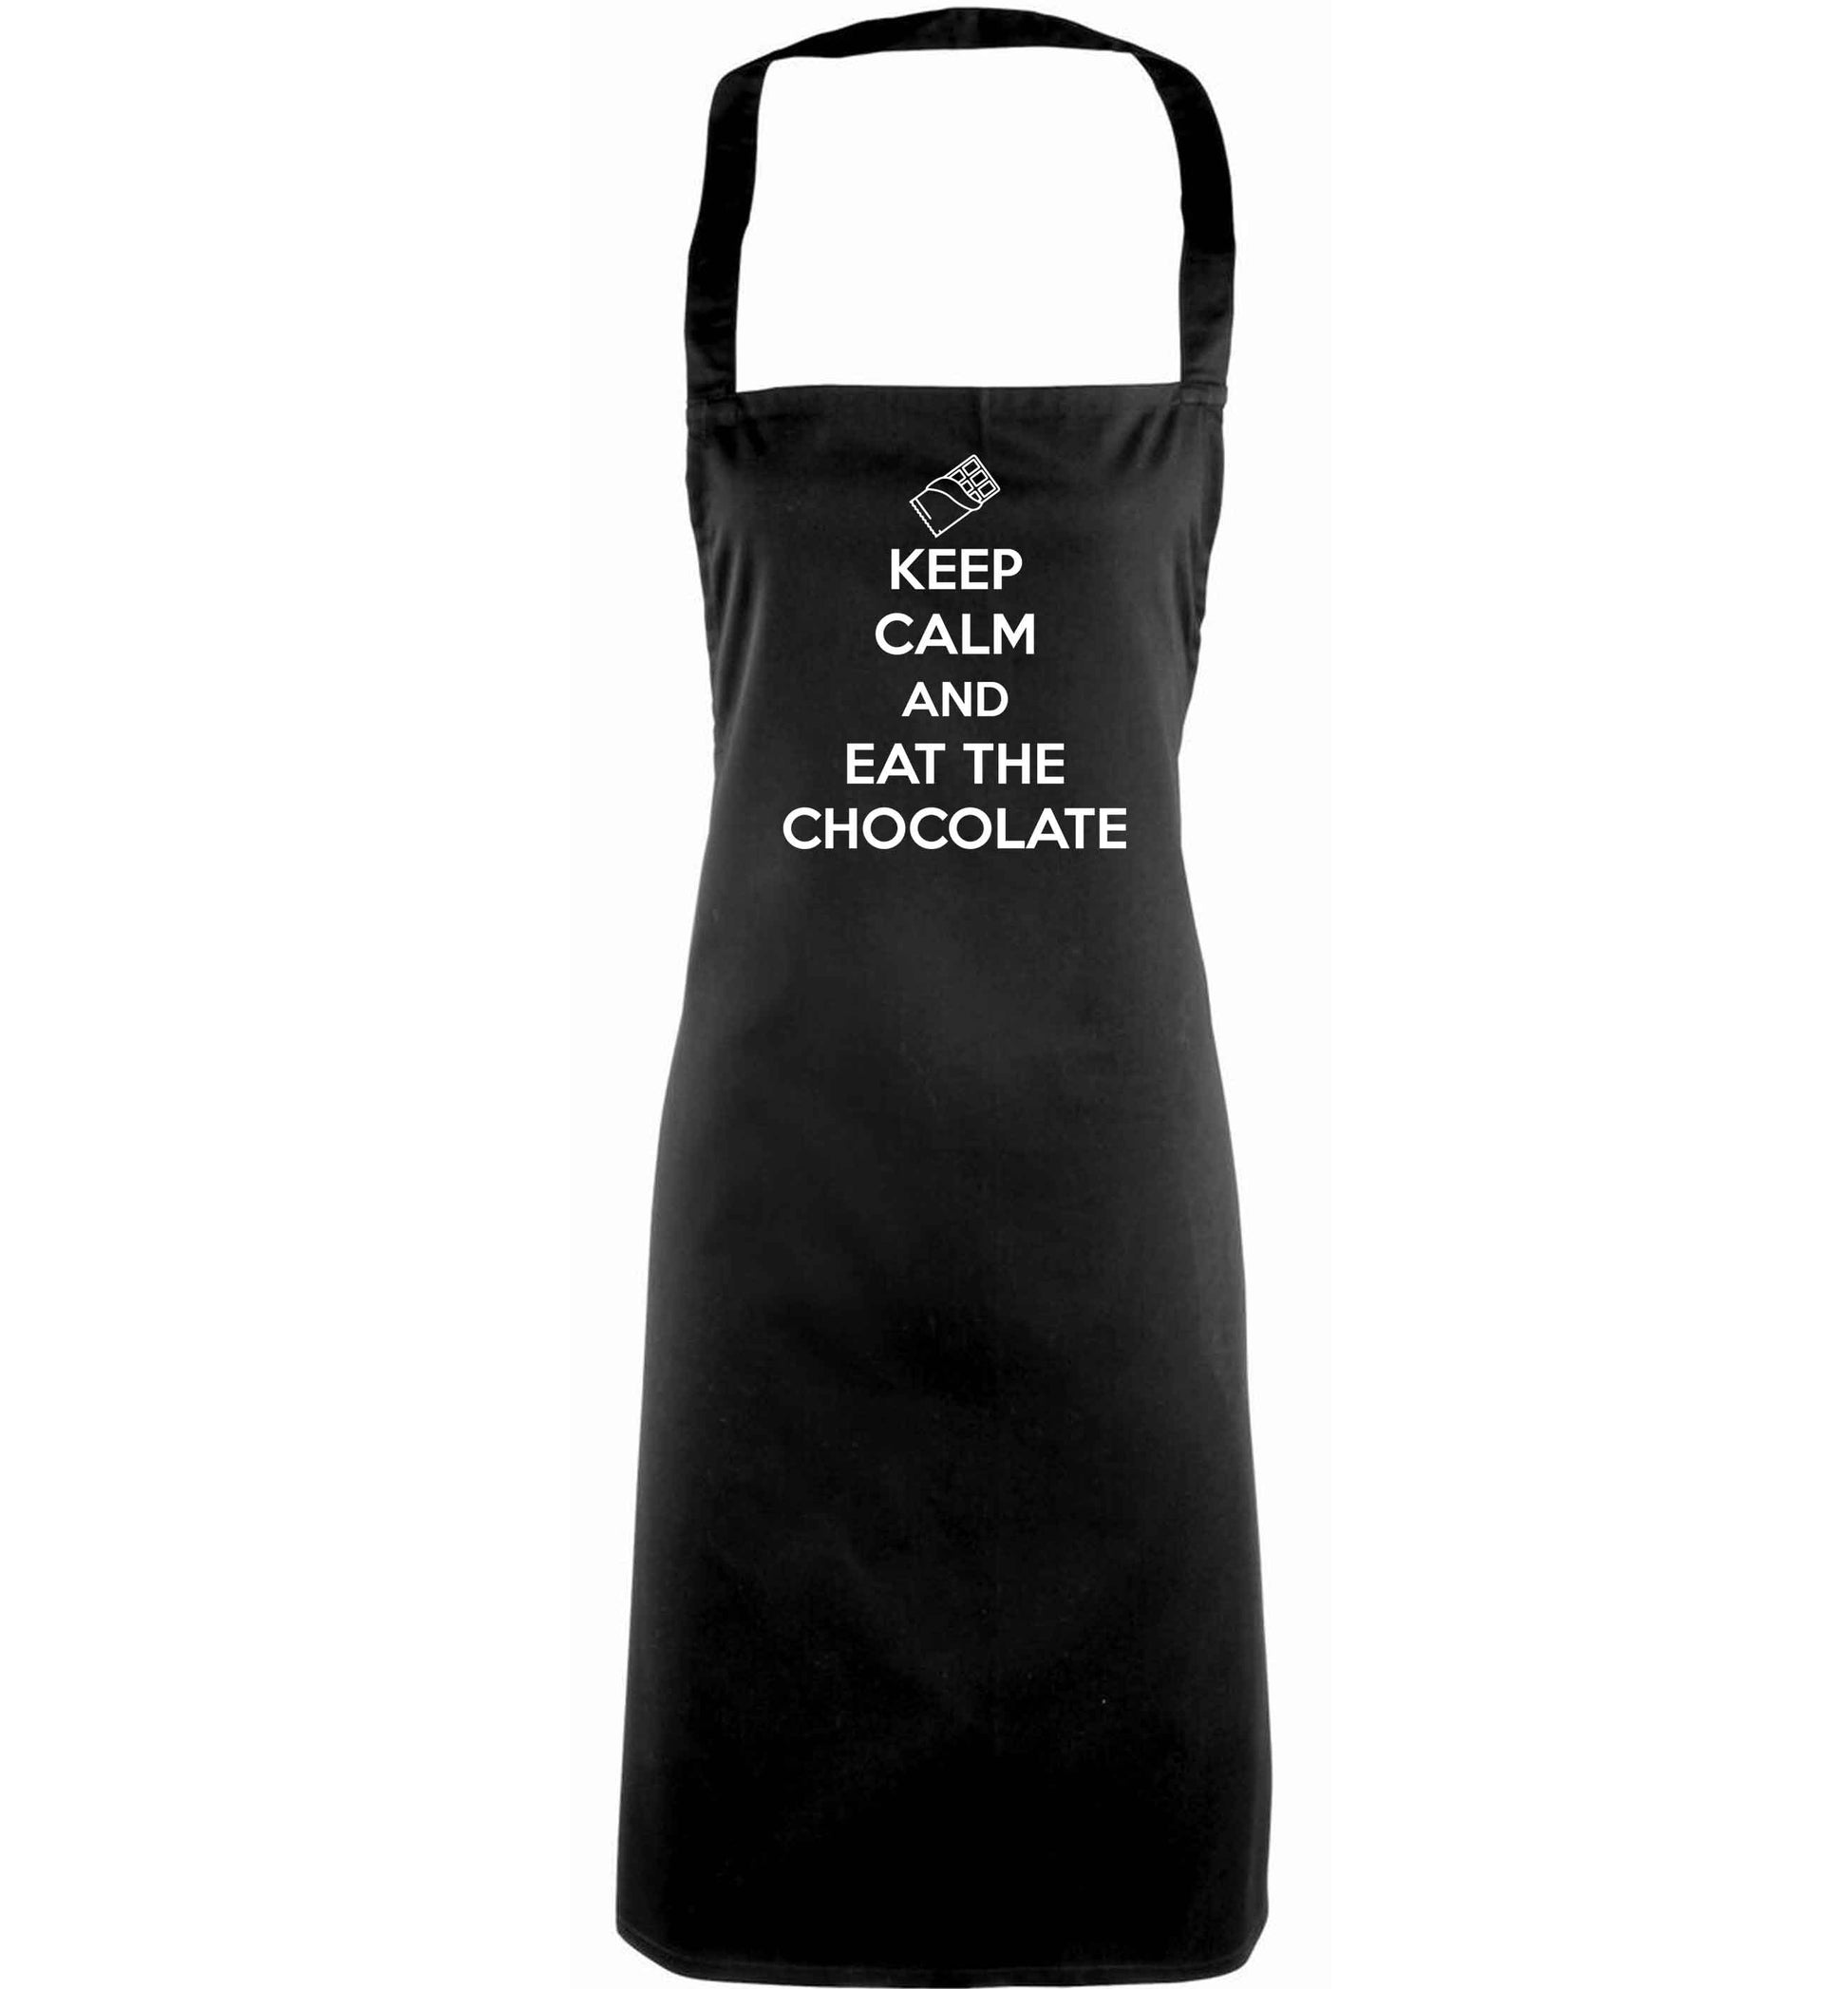 funny gift for a chocaholic! Keep calm and eat the chocolate adults black apron